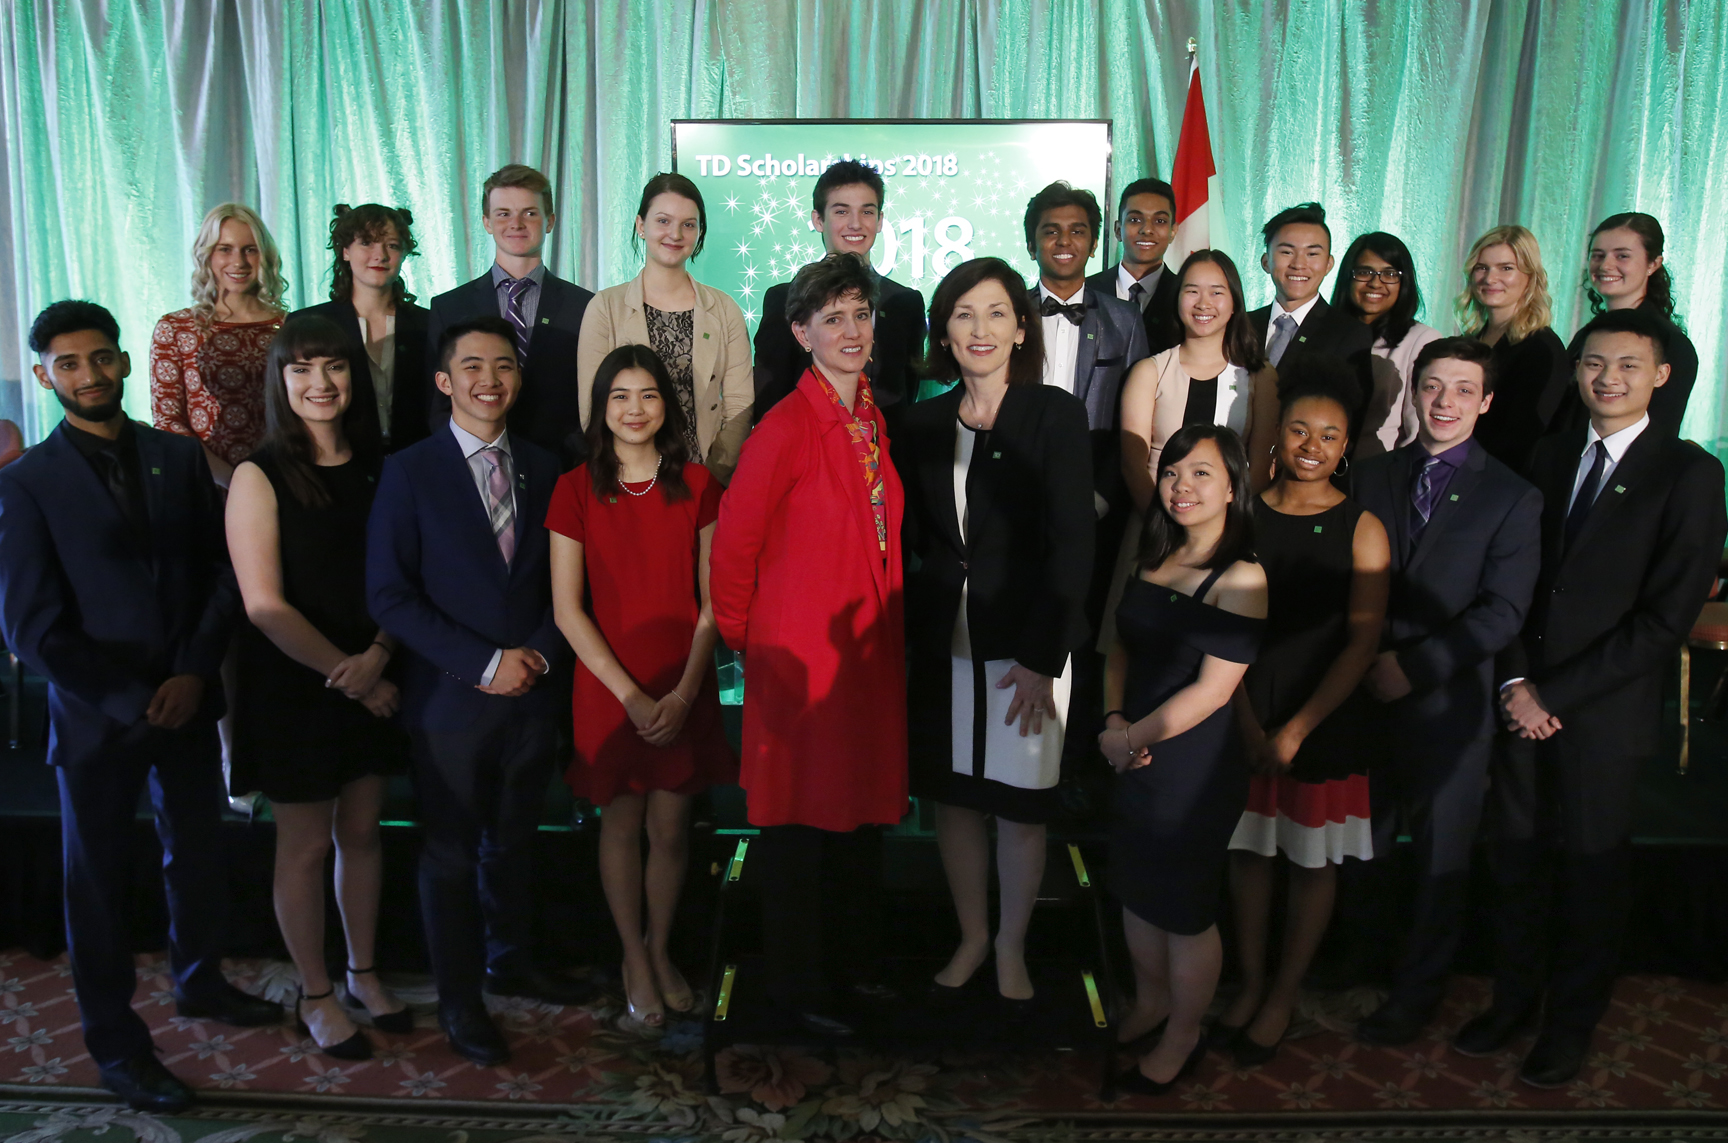 TD Canada Trust - Student Services - Scholarships for Community Leadership